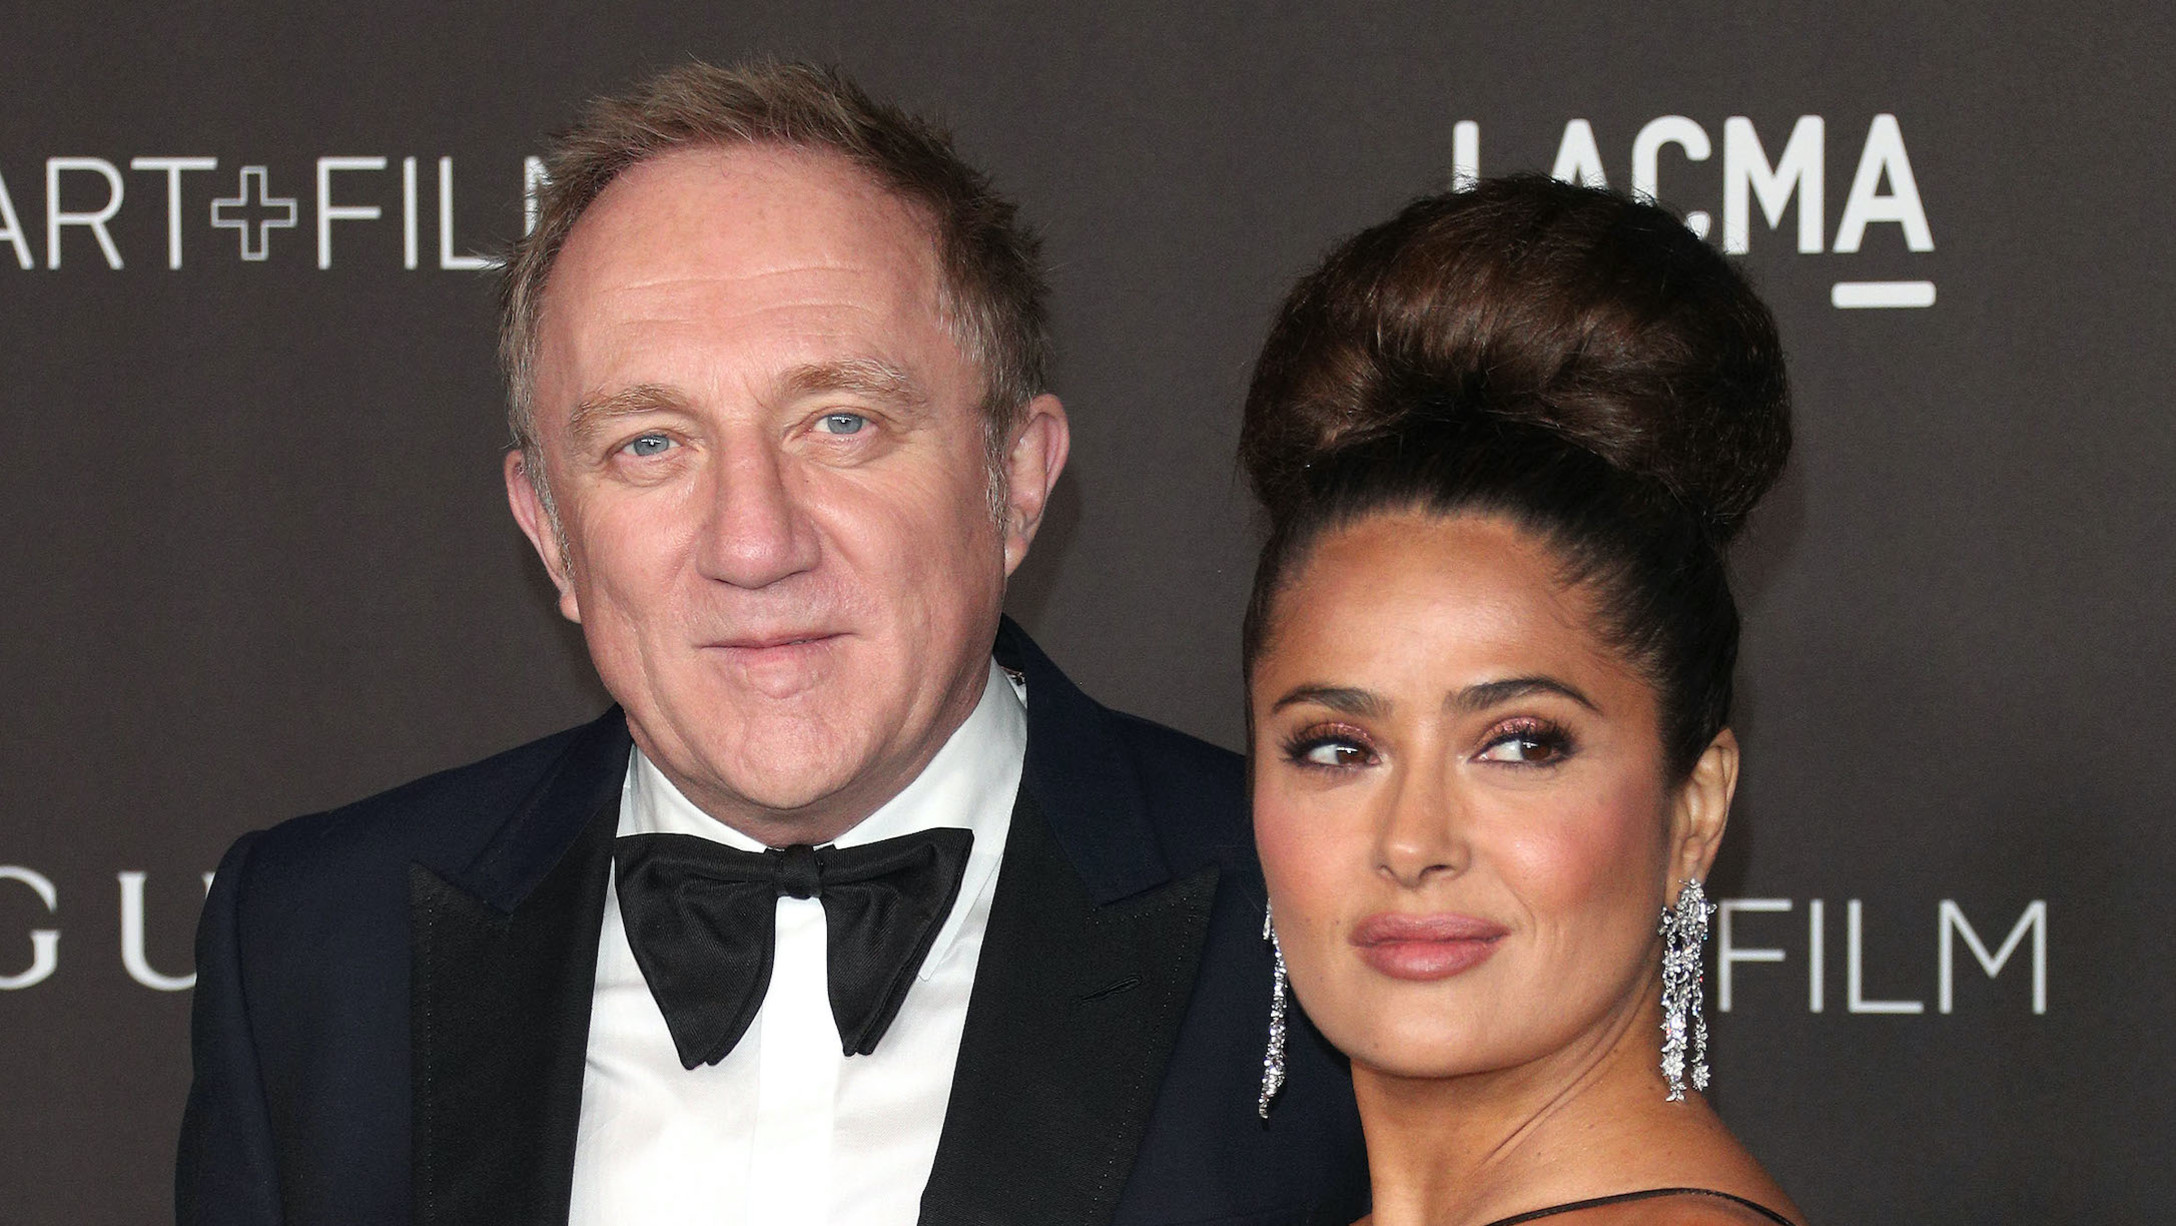 Salma Hayek finally addresses claims that she married her husband for money  